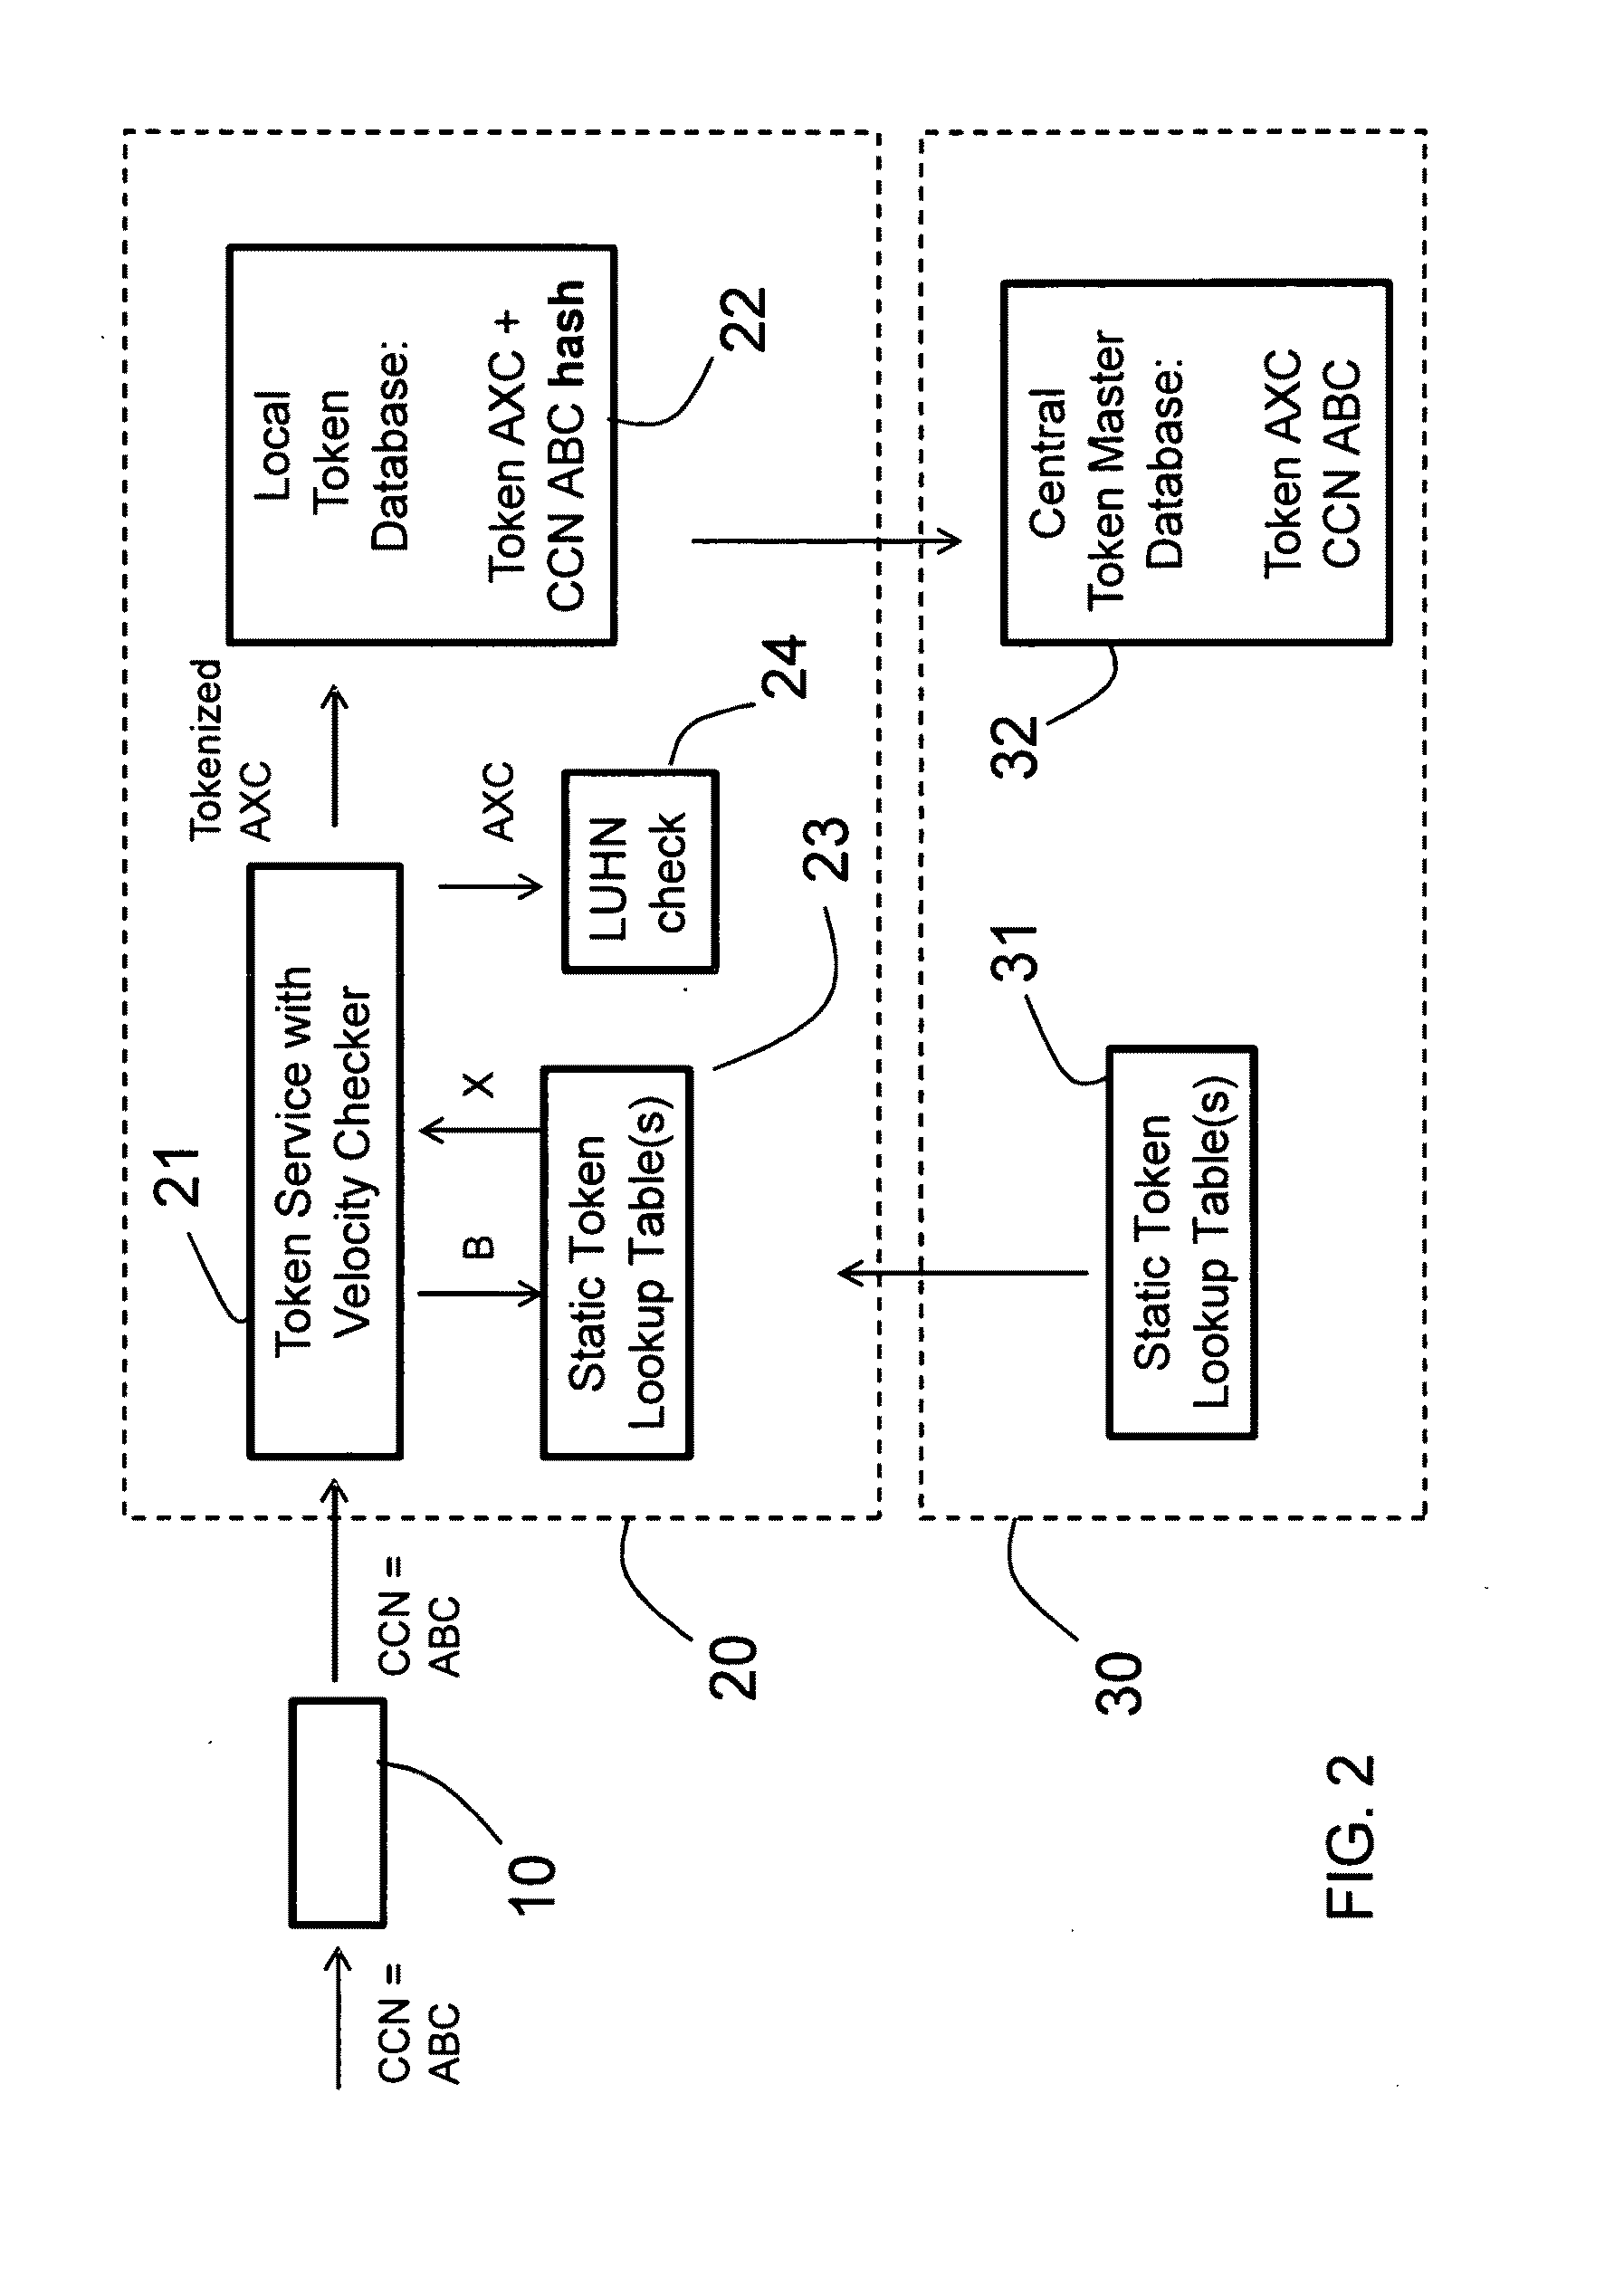 System and method for distributed tokenization using several substitution steps